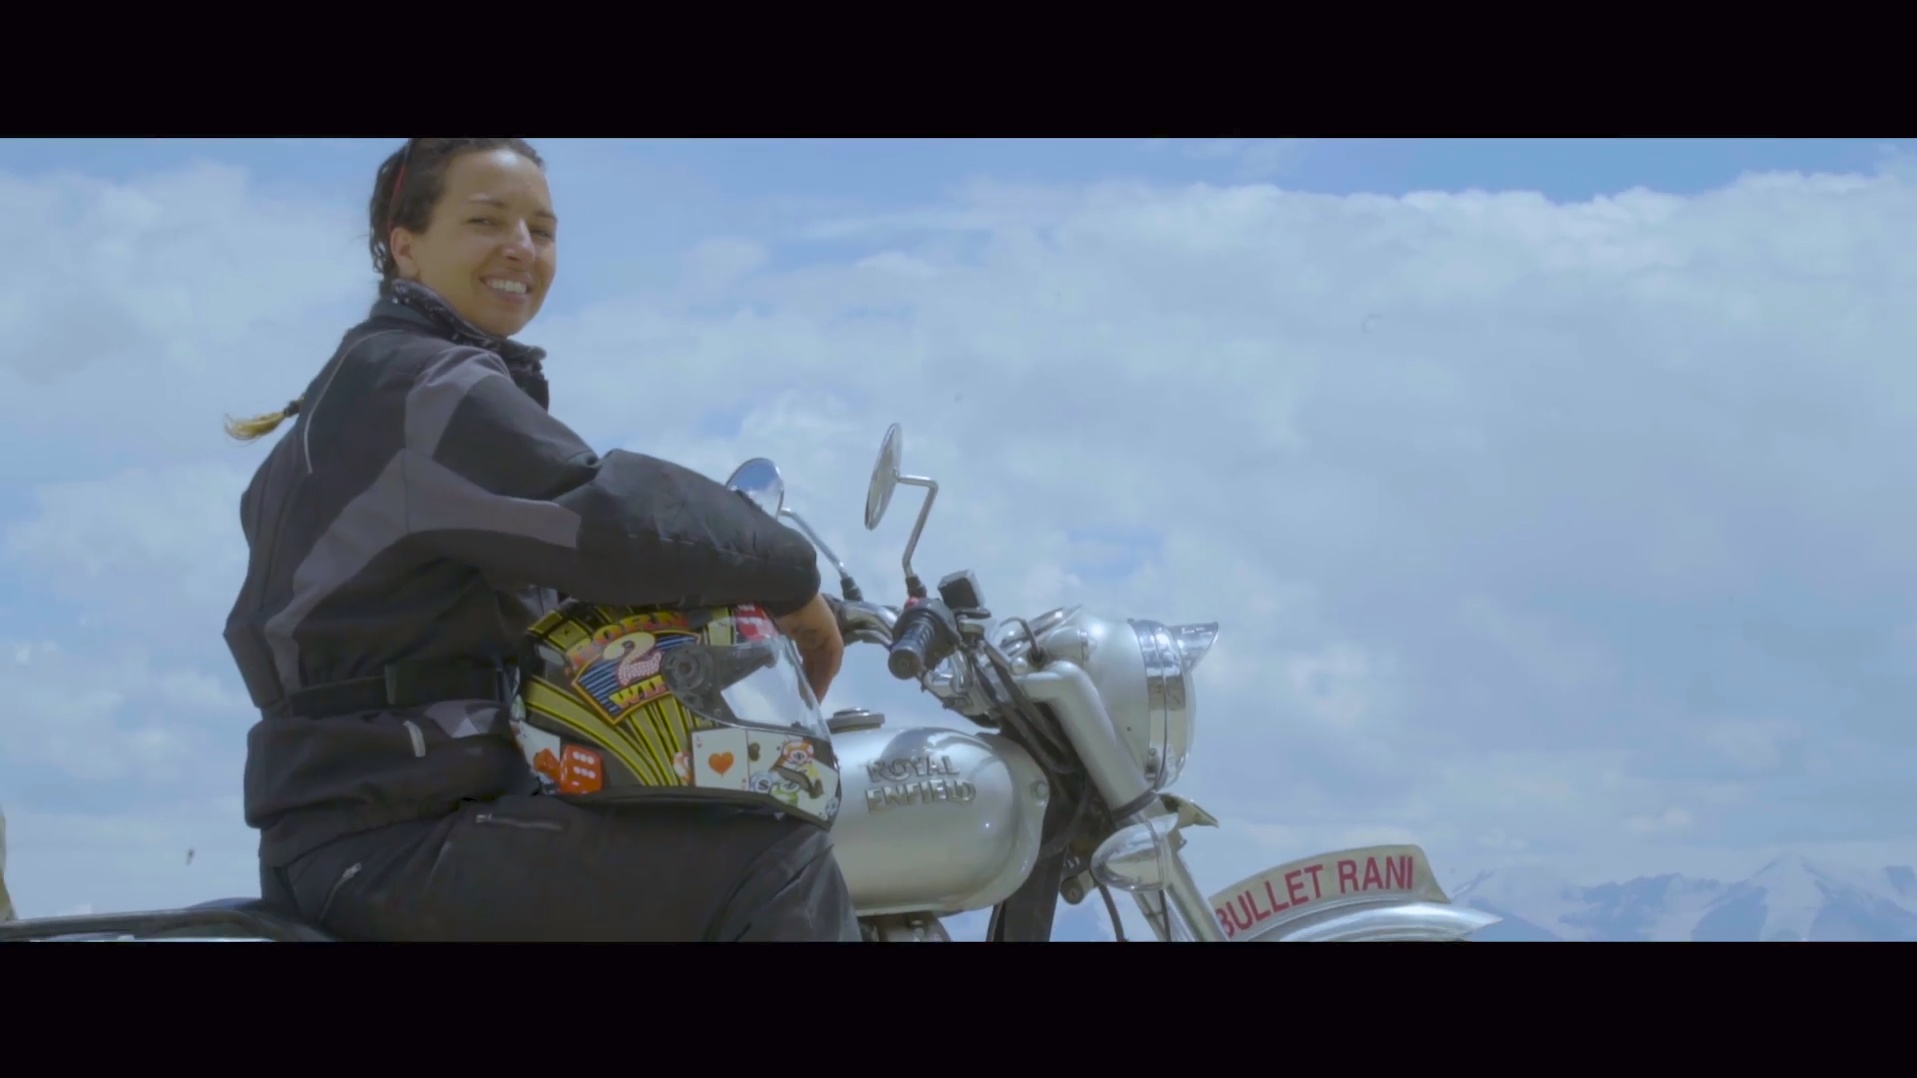 Royal Enfield Celebrated International Women’s Day With a New Video